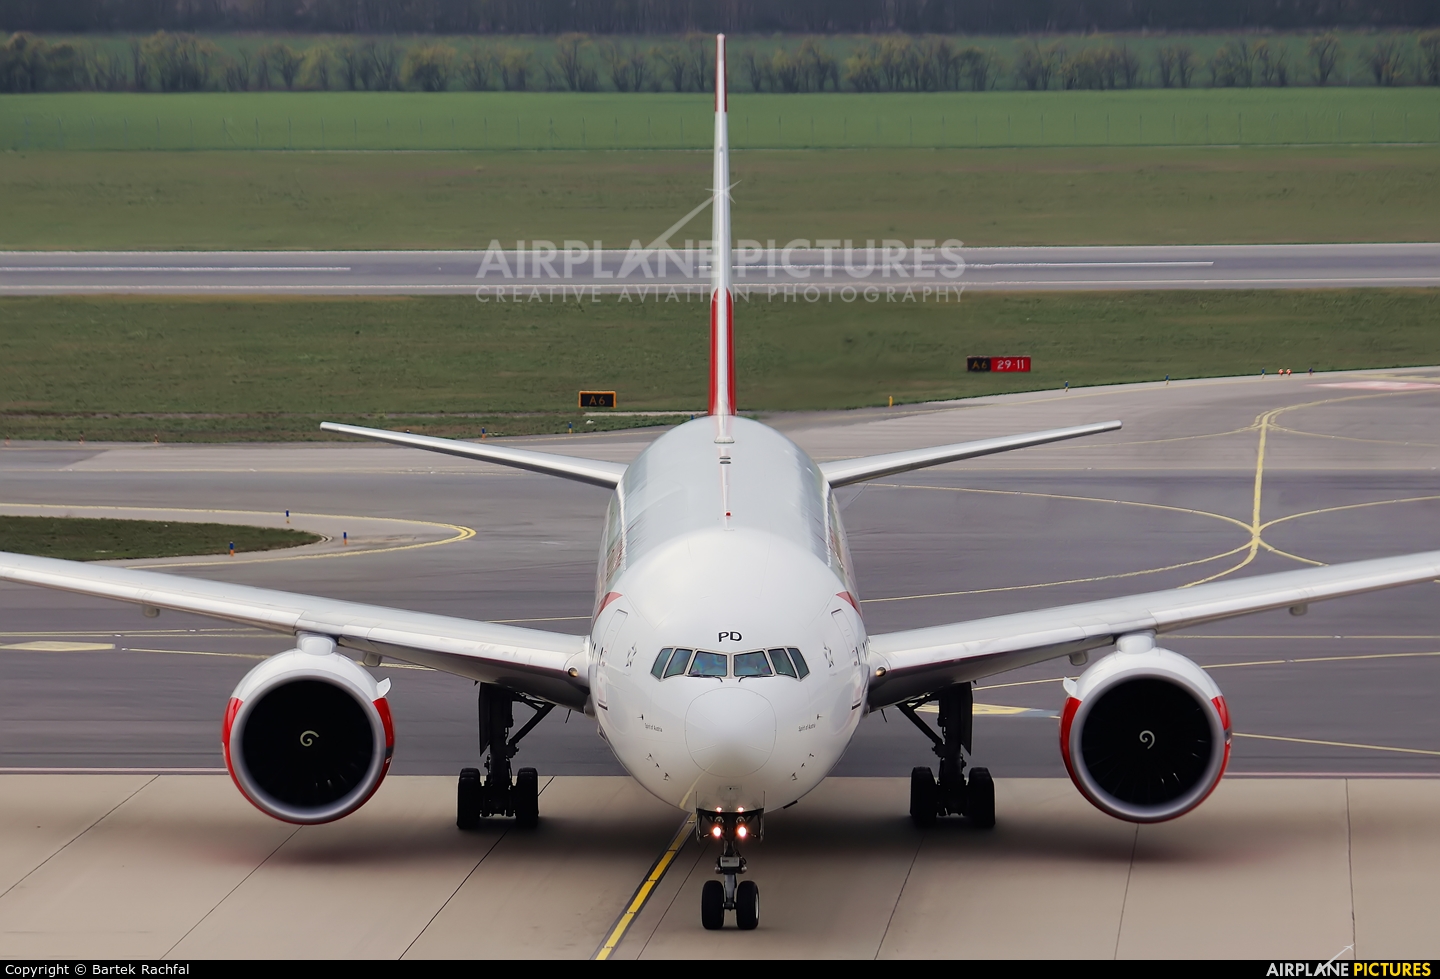 Austrian Airlines/Arrows/Tyrolean OE-LPD aircraft at Vienna - Schwechat